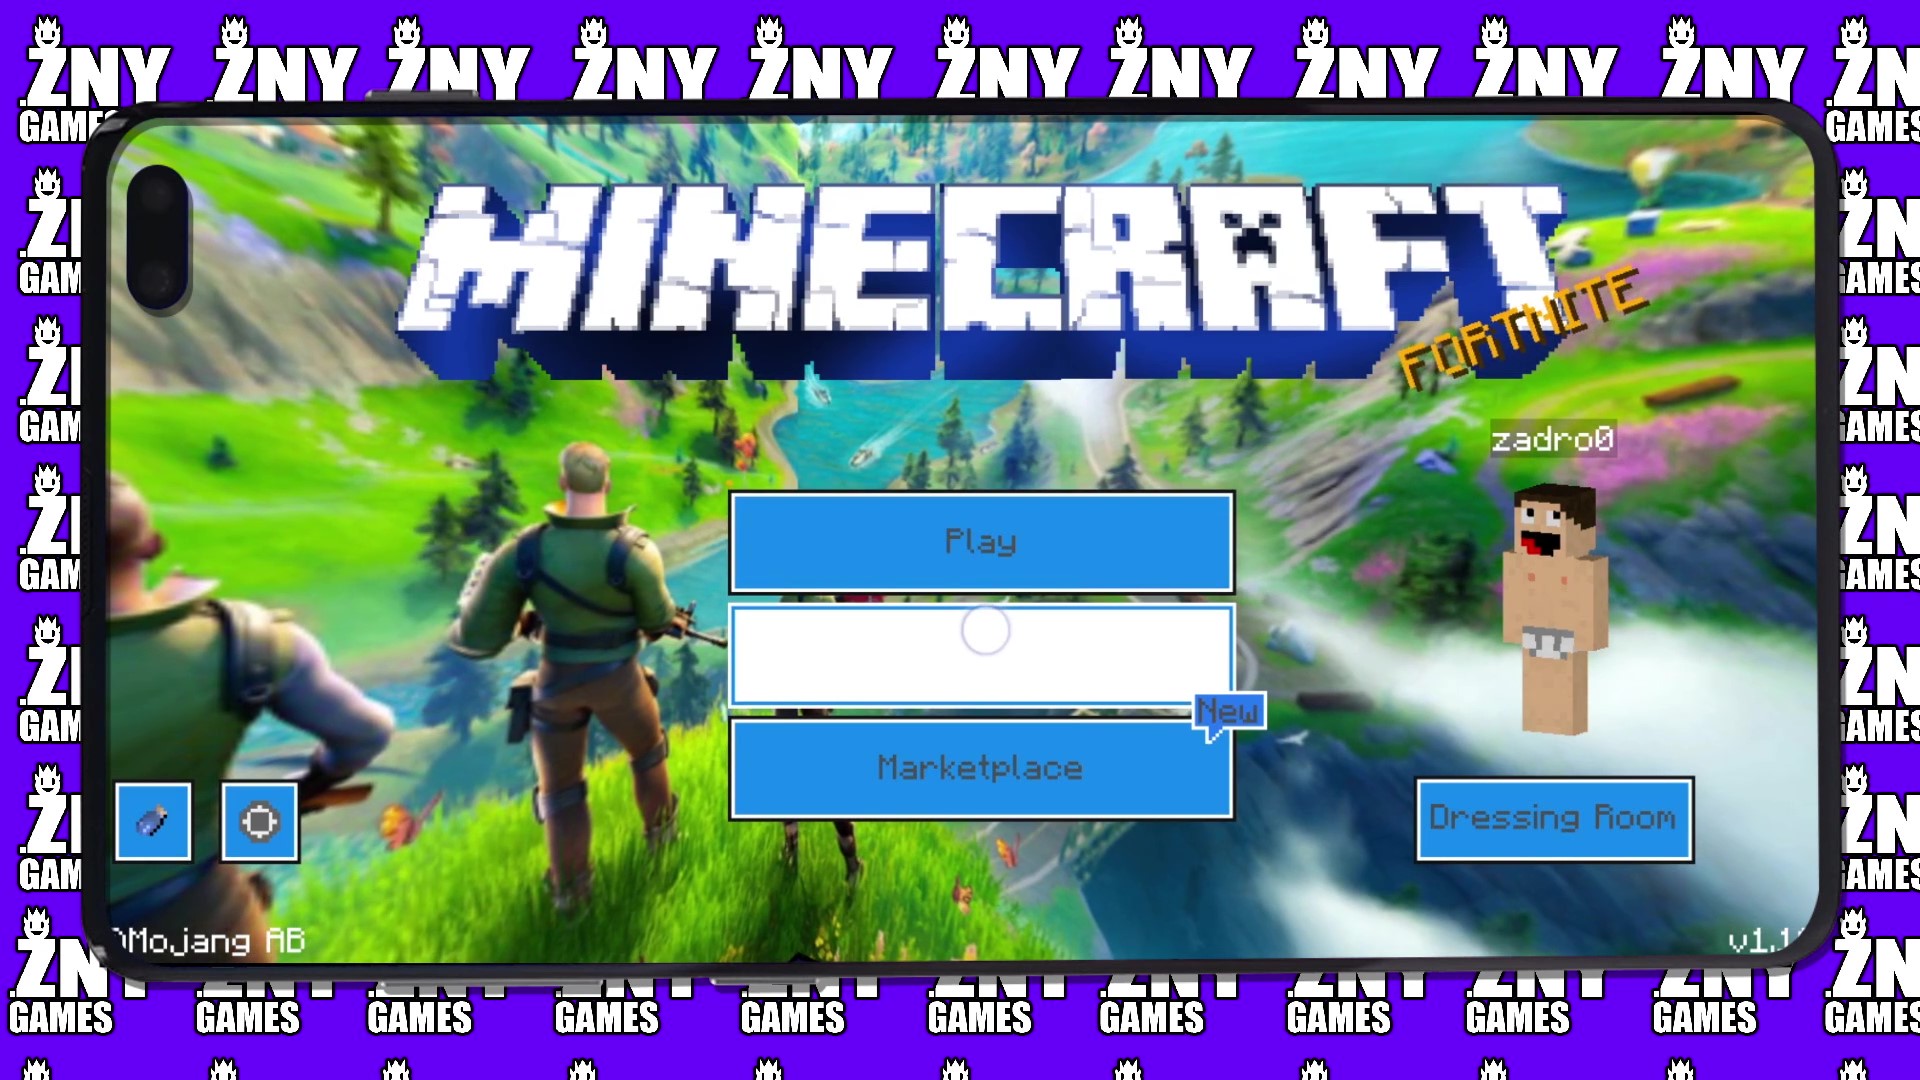 znygames gui texturepack fortnite edition android ios - startscreen